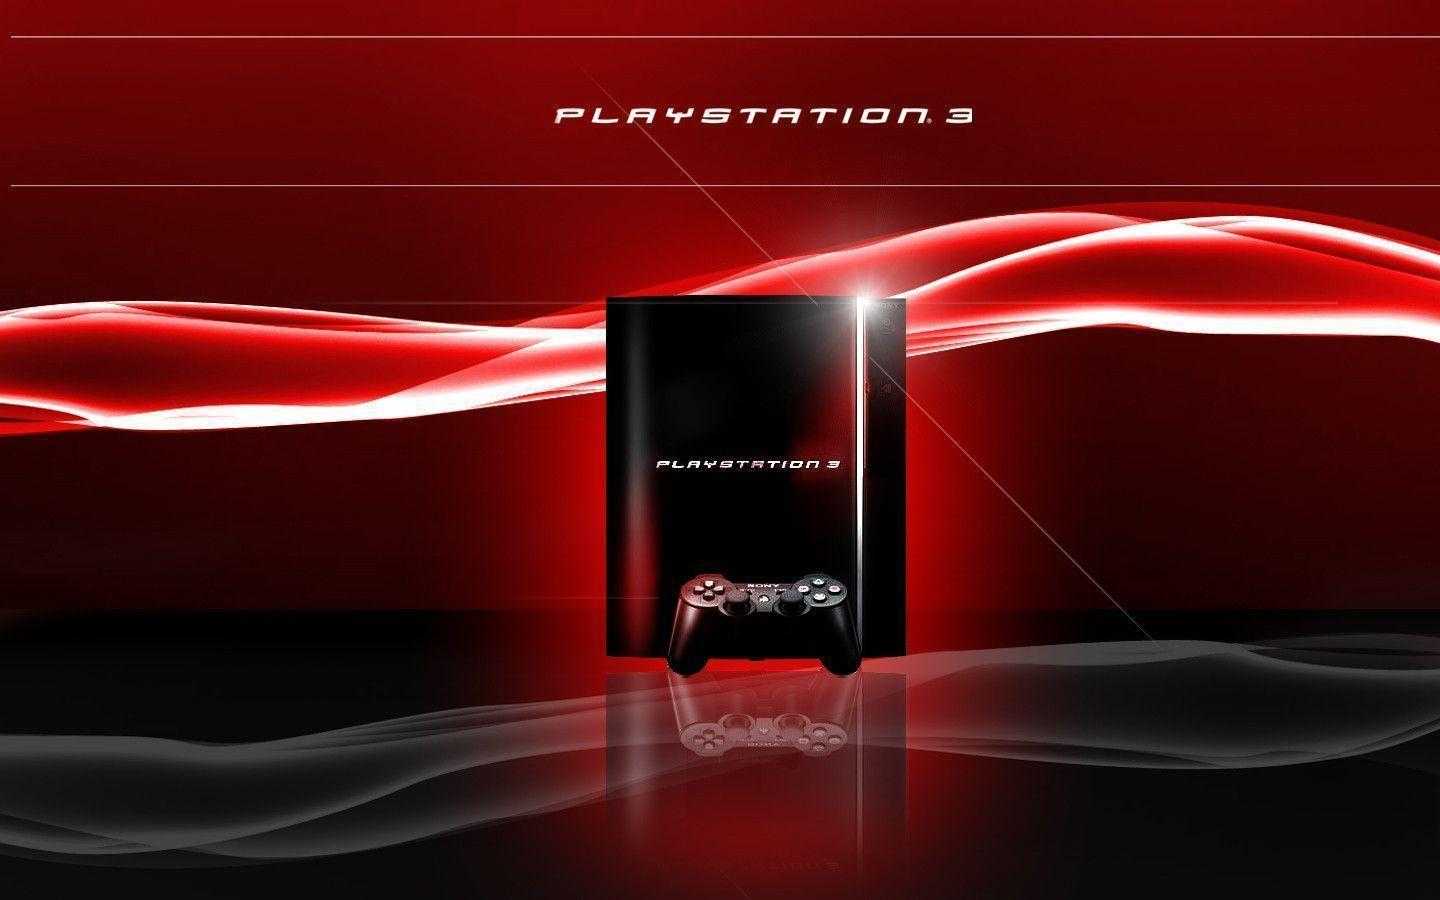 4k HD For Playstation Wallpaper Ps3 Background Pics Mobile Phones